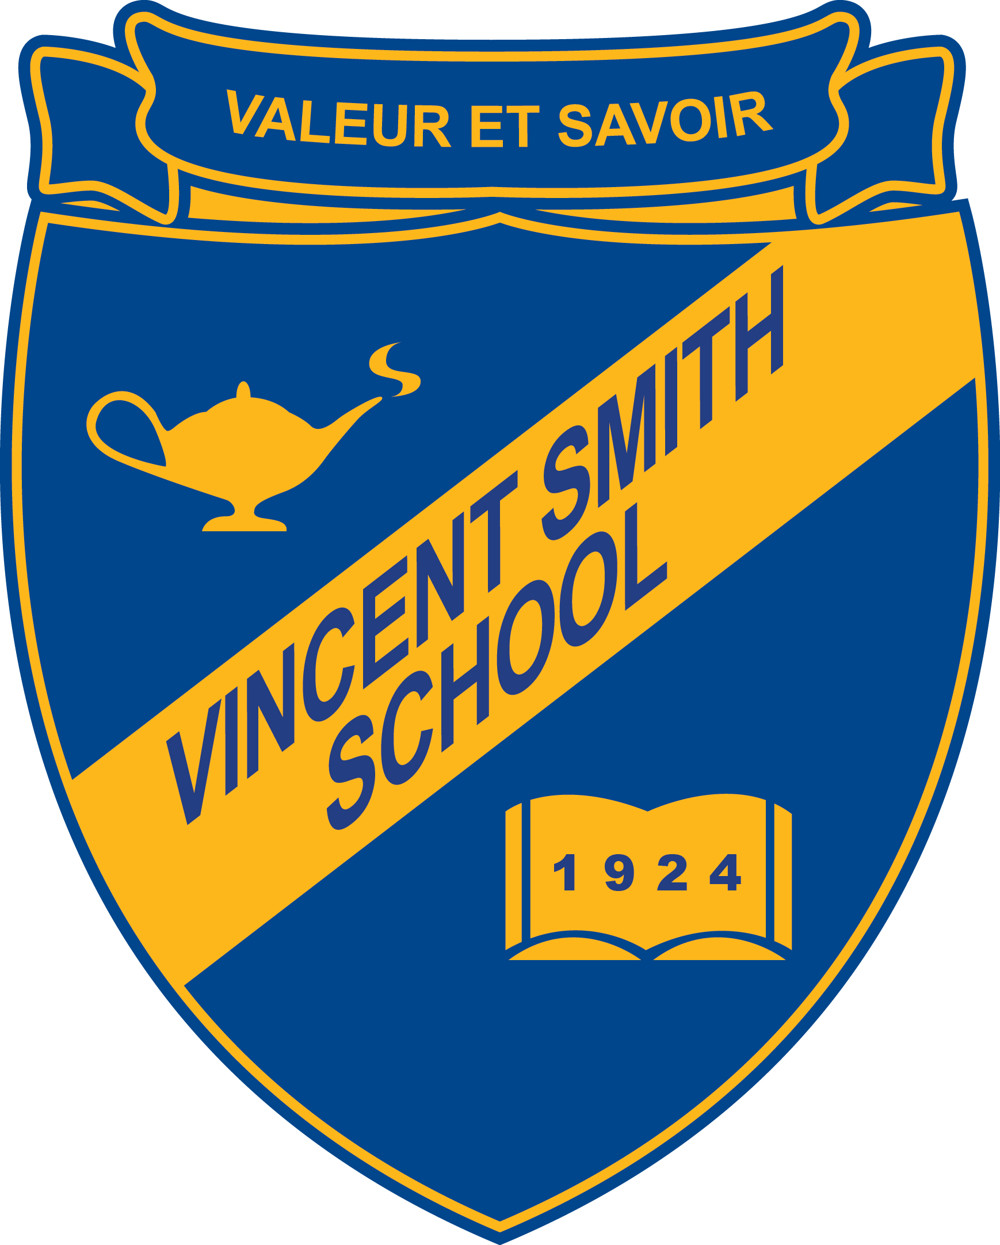 The Vincent Smith School